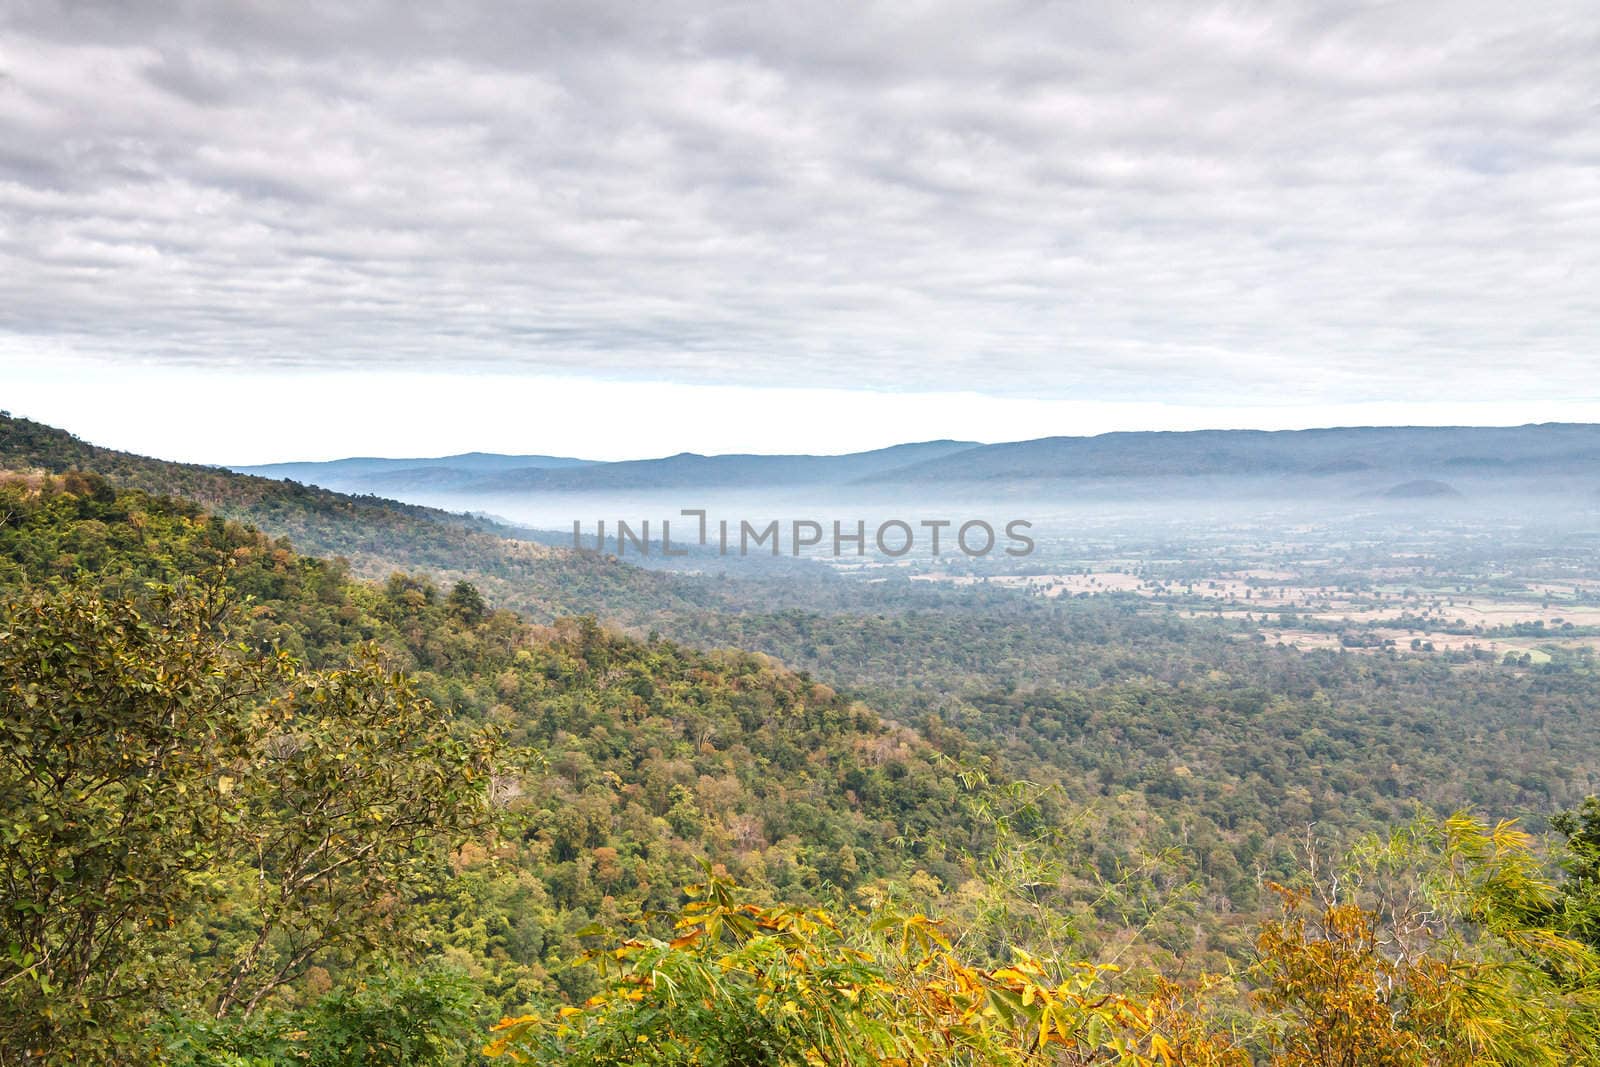 View point from Phukradung National Park, Loei Province, Thailand.